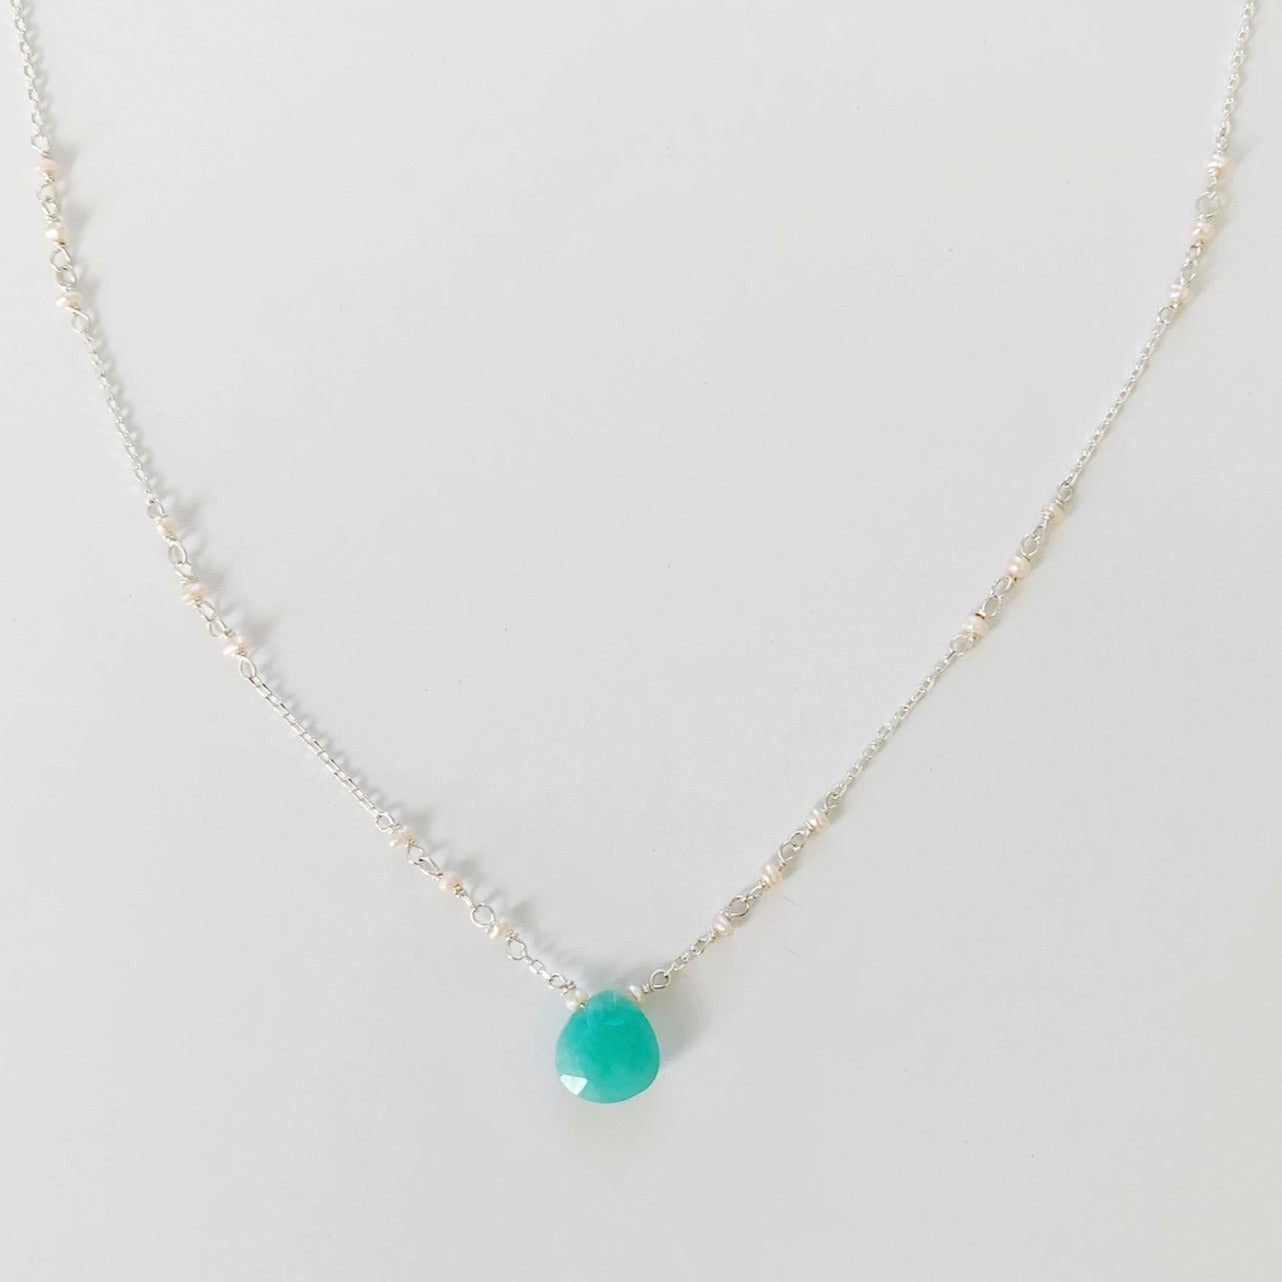 Island Air Necklace in sterling silver by mermaids and madeleines is created in with an amazonite gem at the center and tiny freshwater pearls in the chain. This necklace is pictured over a white background